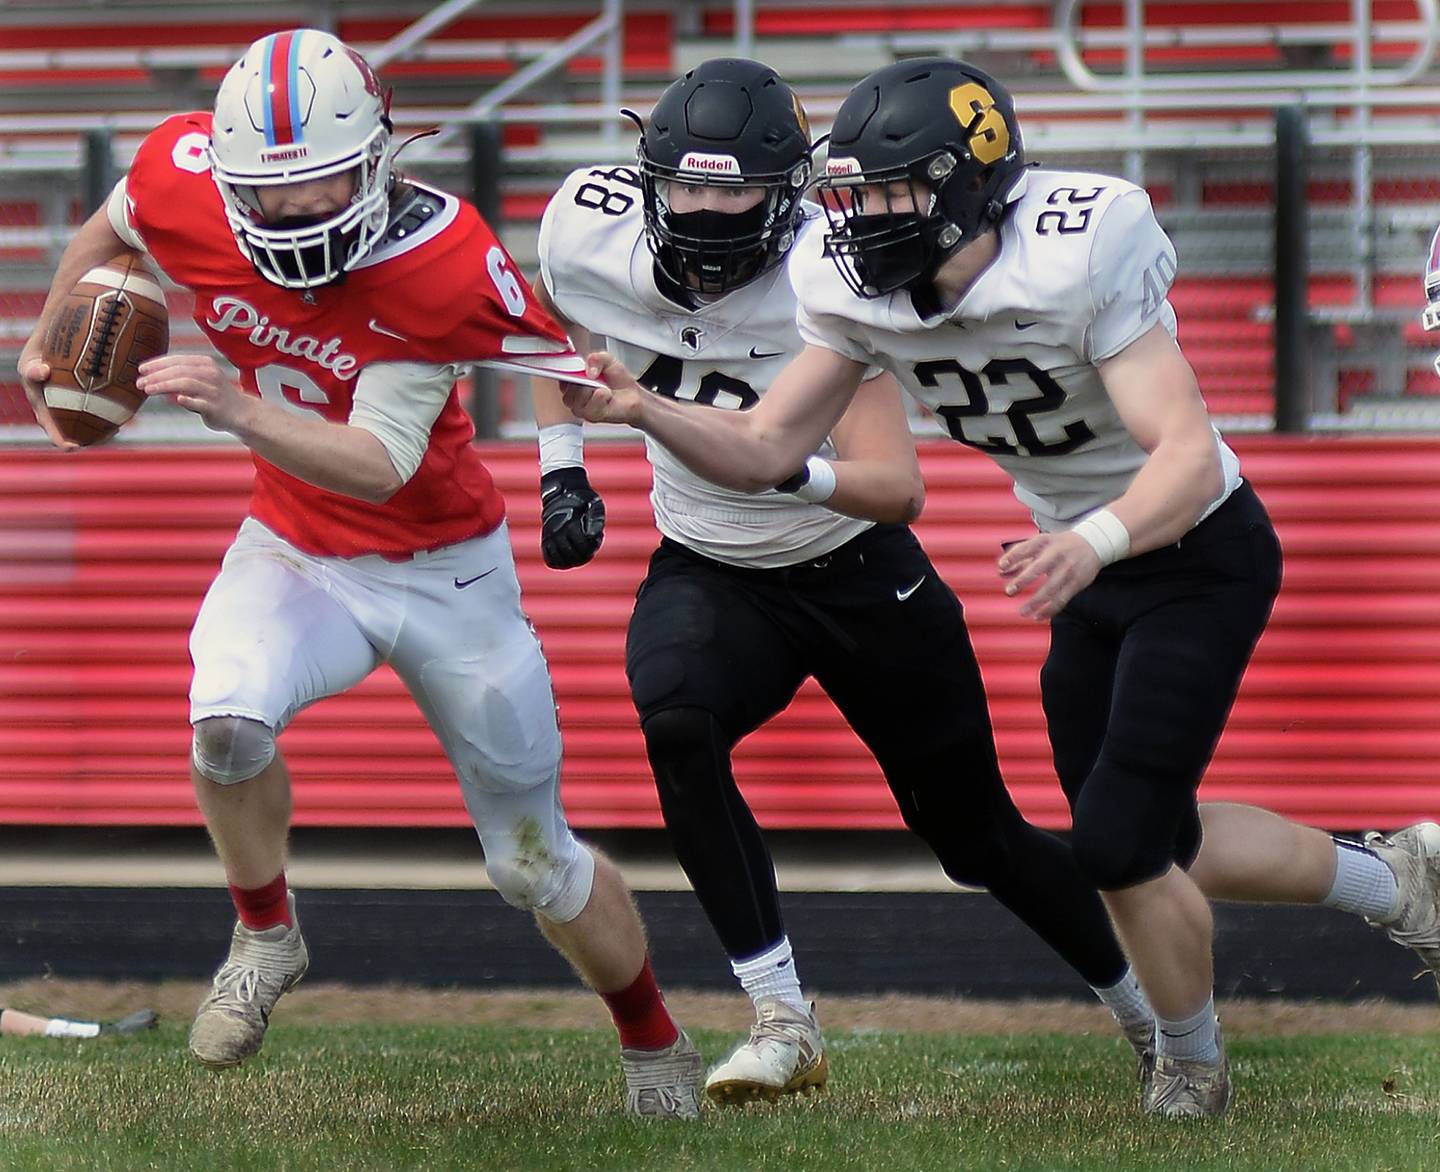 Ottawa running back Bryant Schomas works to get away from the pursuing Zach Wilkinson and Ethan Bode of Sycamore on a run during the first quarter Saturday in Ottawa.